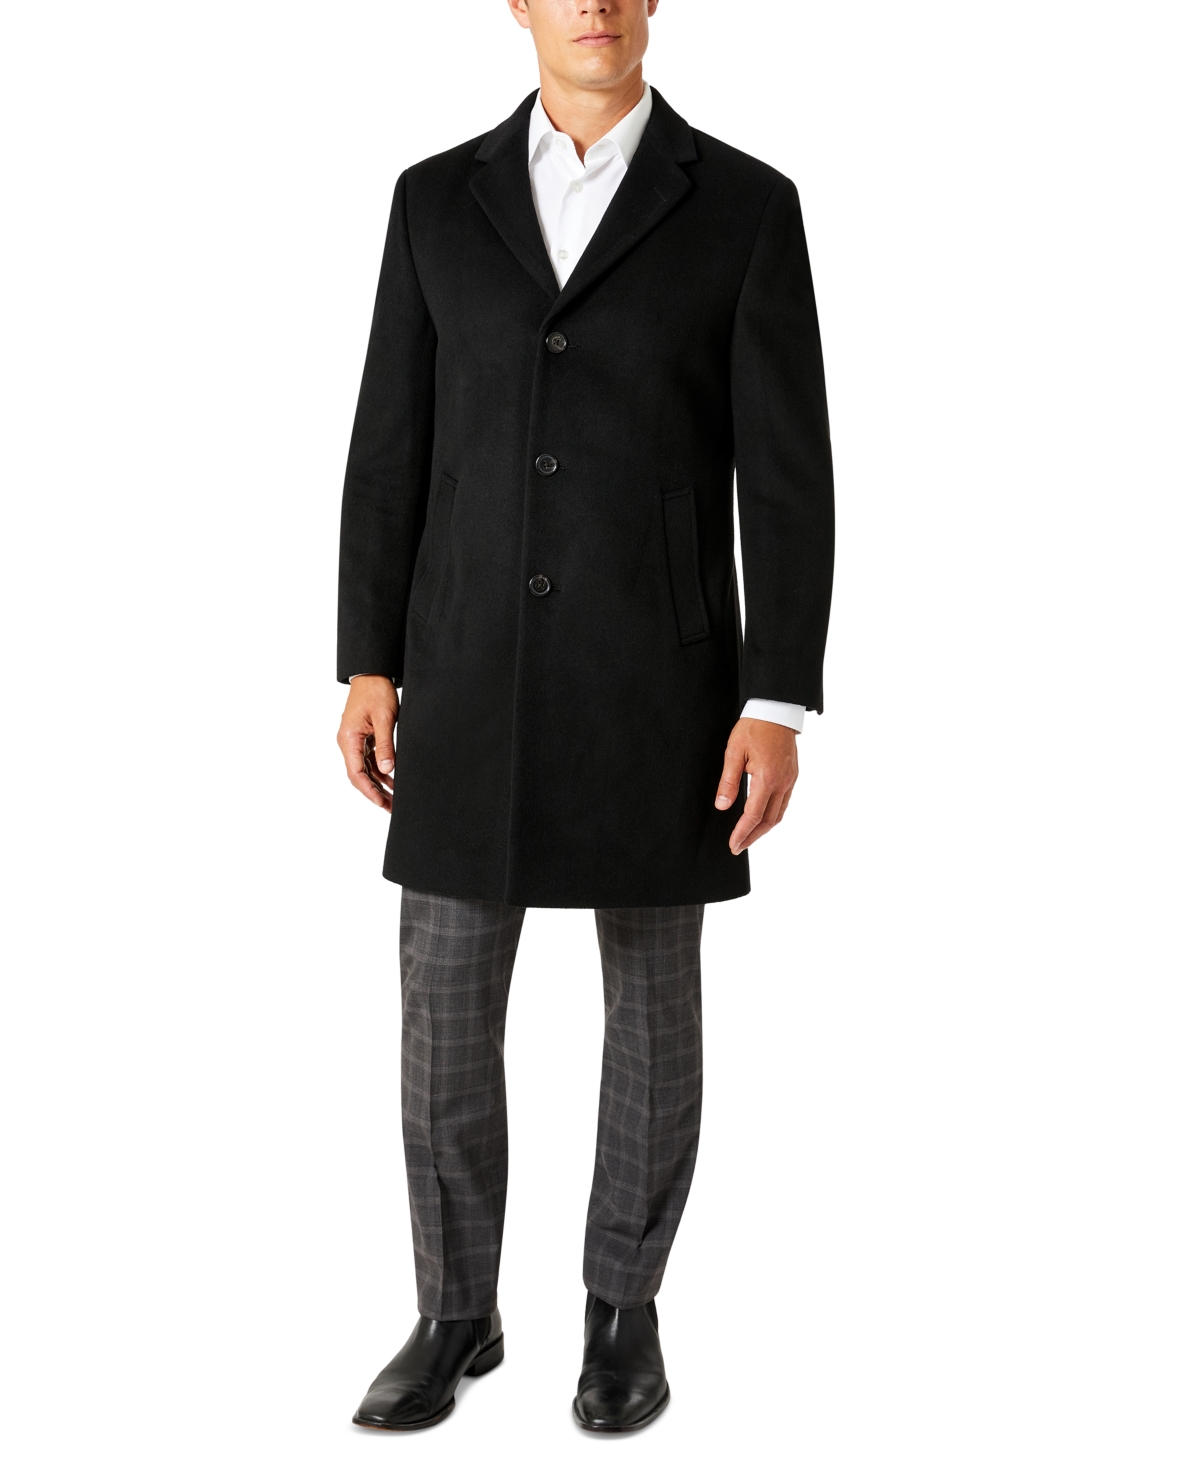 Men's Single-Breasted Classic Fit Overcoat - Black